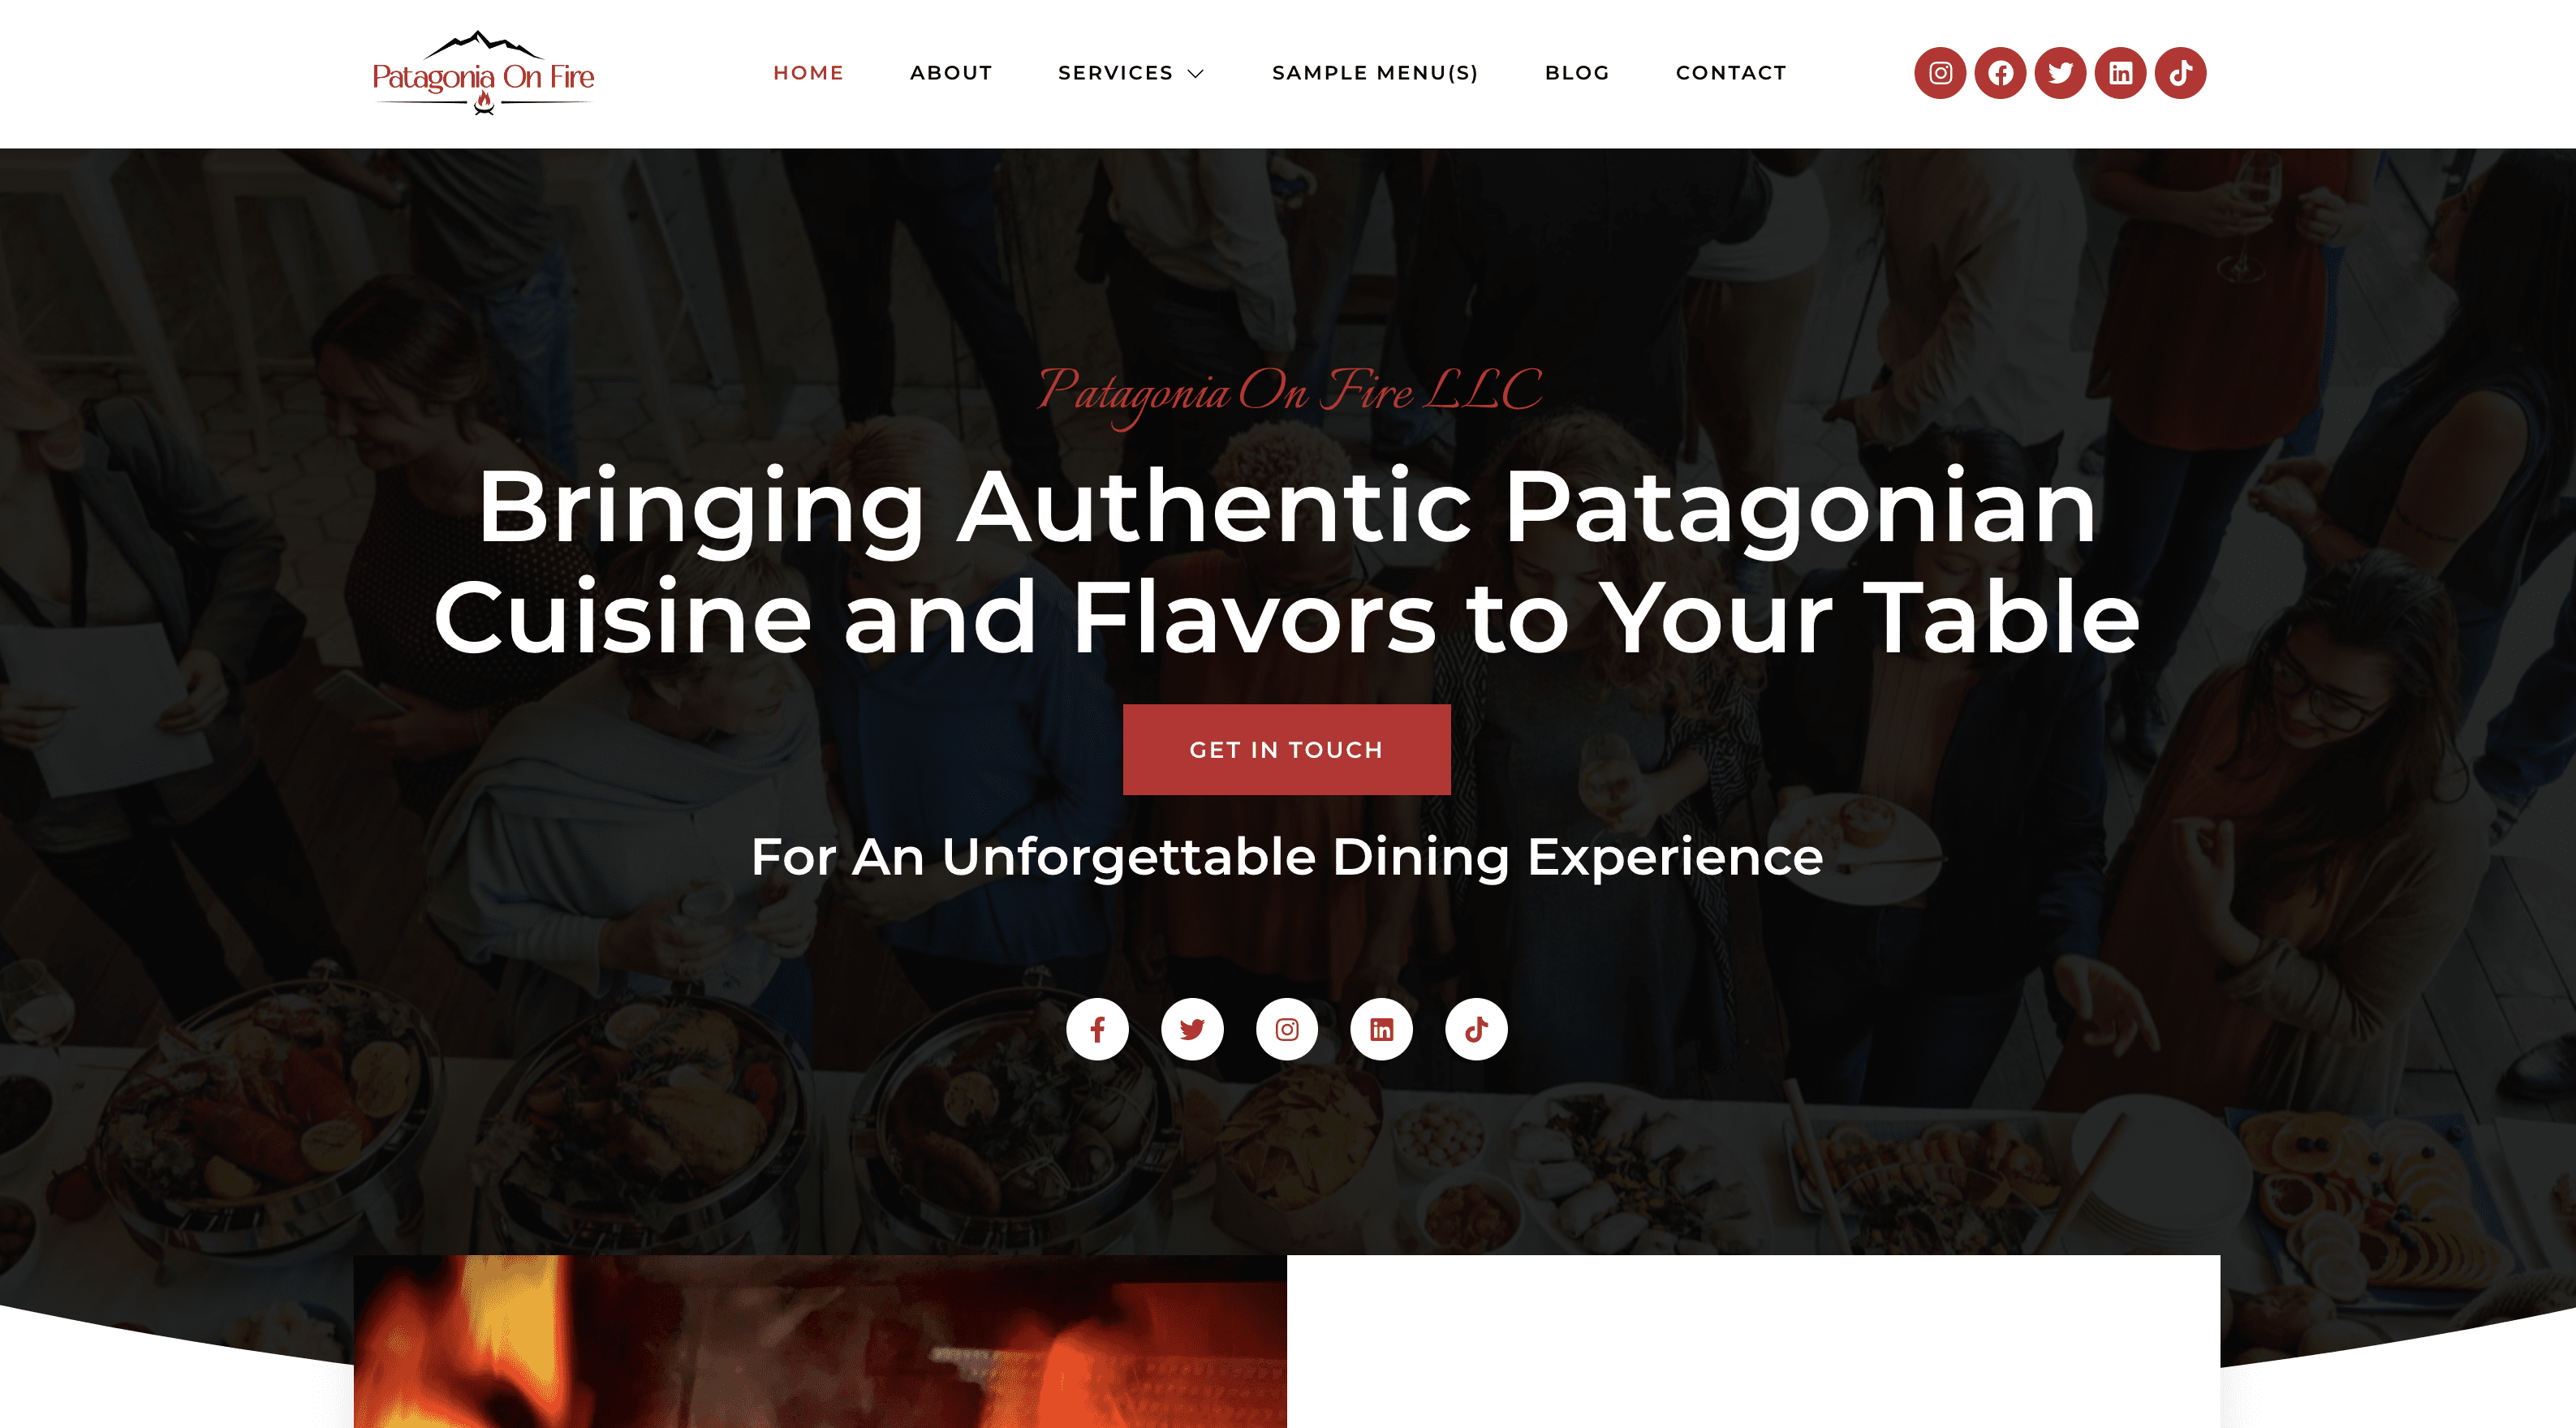 Patagonia On Fire LLC - private dining & catering